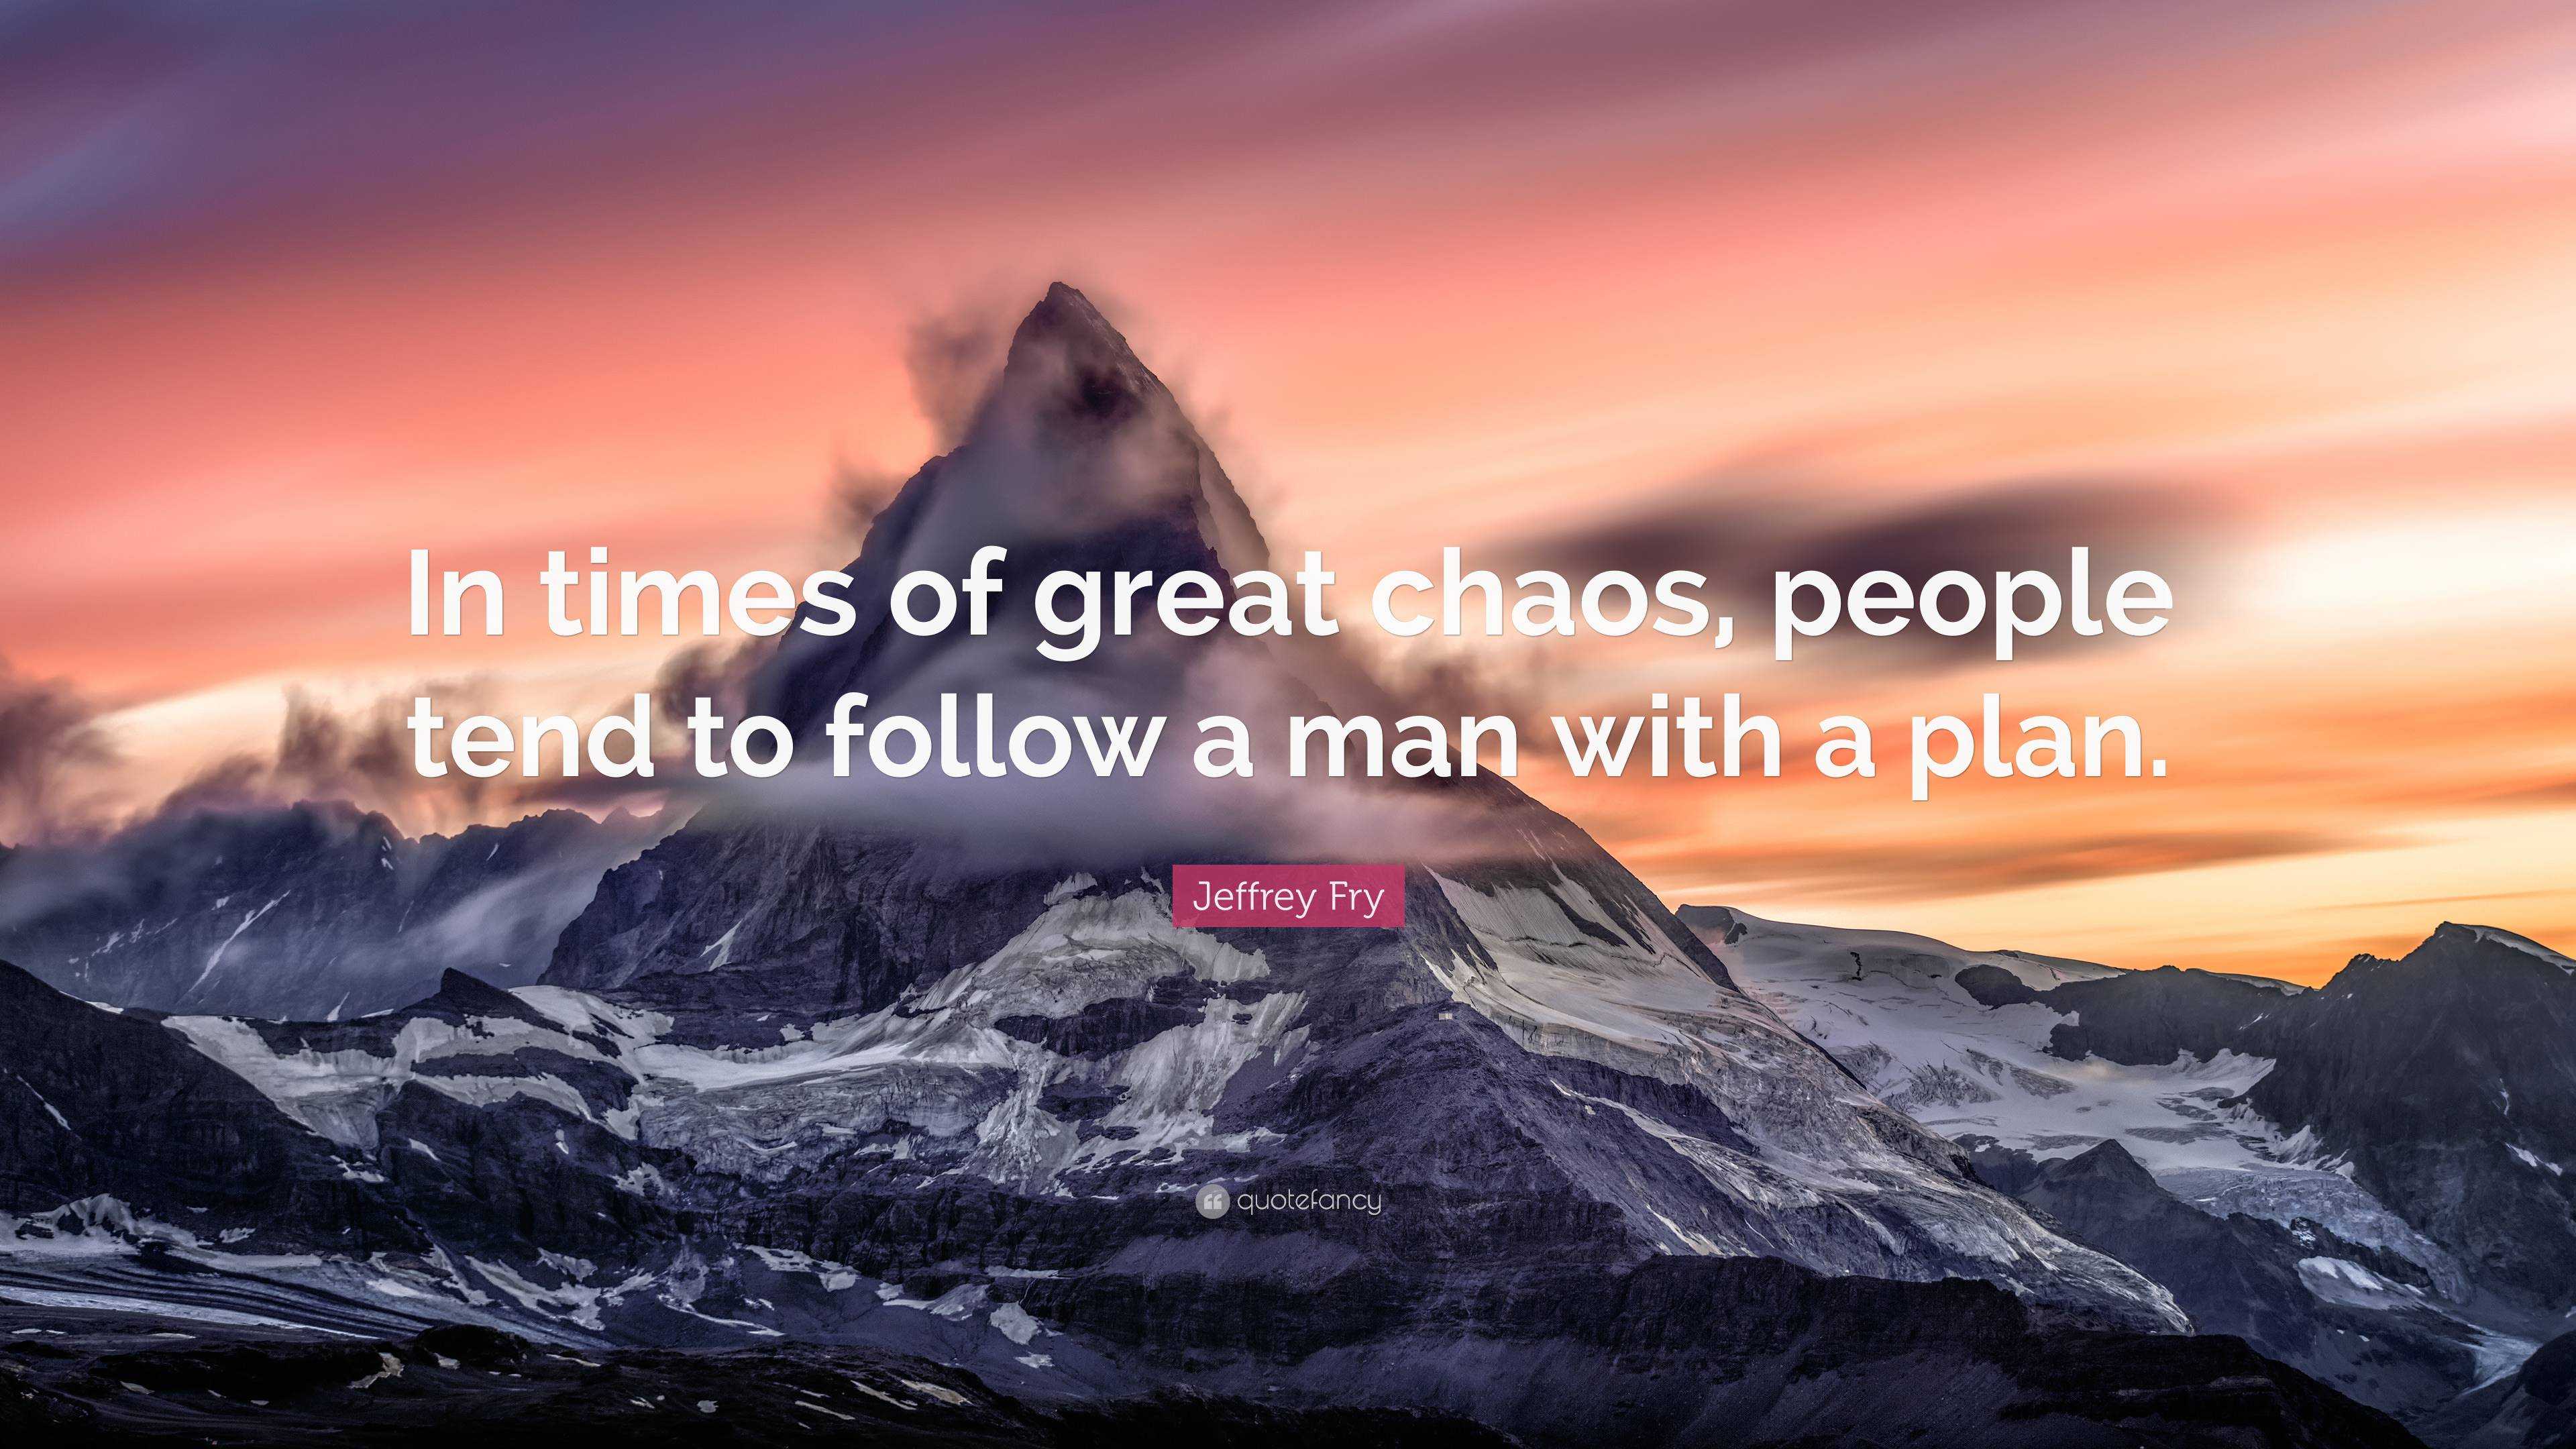 Jeffrey Fry Quote In Times Of Great Chaos People Tend To Follow A Man With A